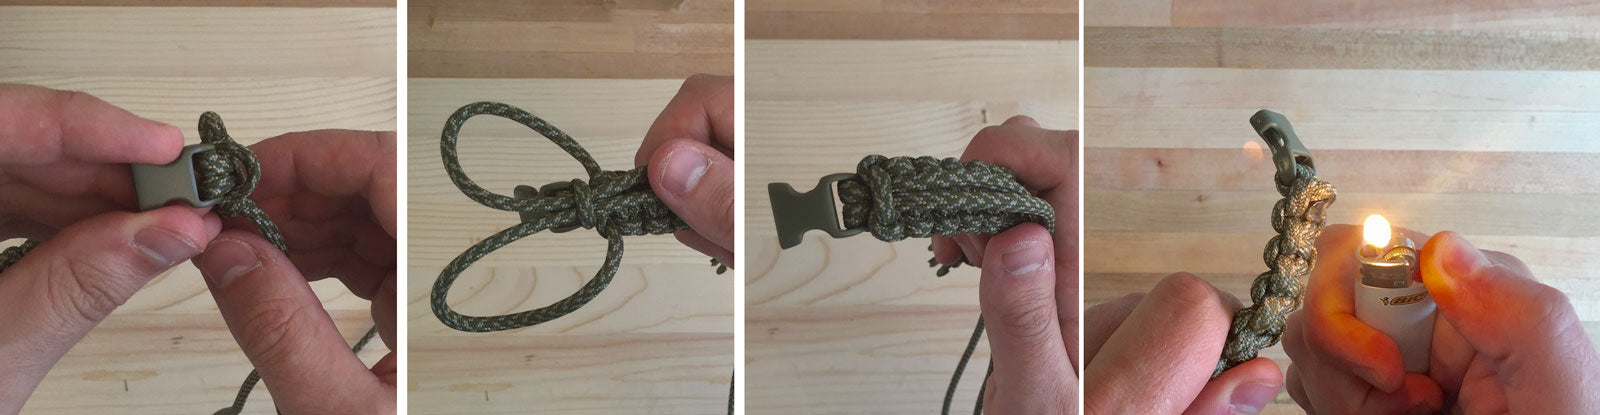 How to tie the finishing knot of a paracord survival bracelet